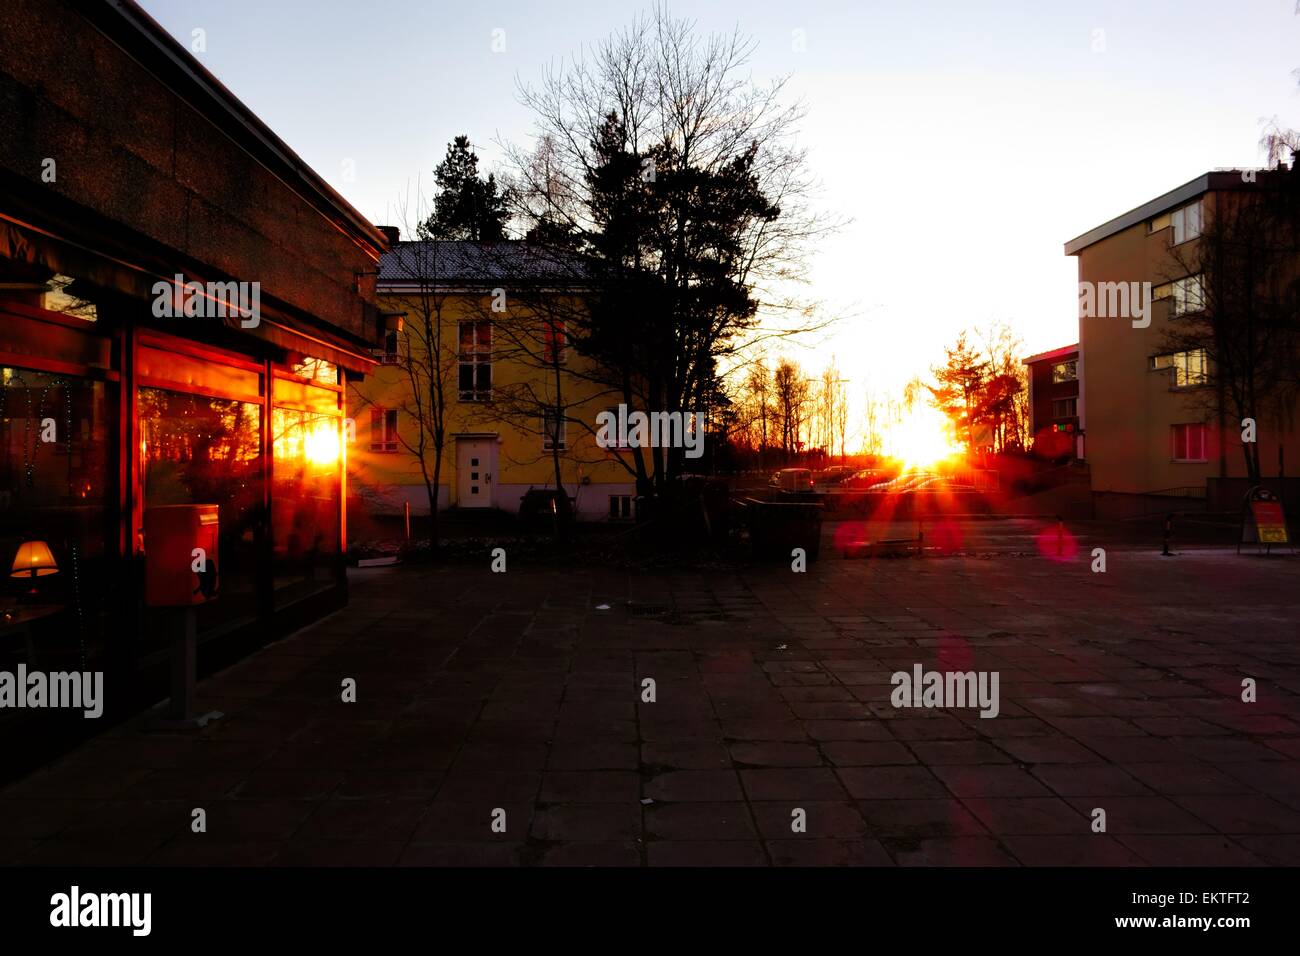 Two suns setting in an urban landscape. Stock Photo